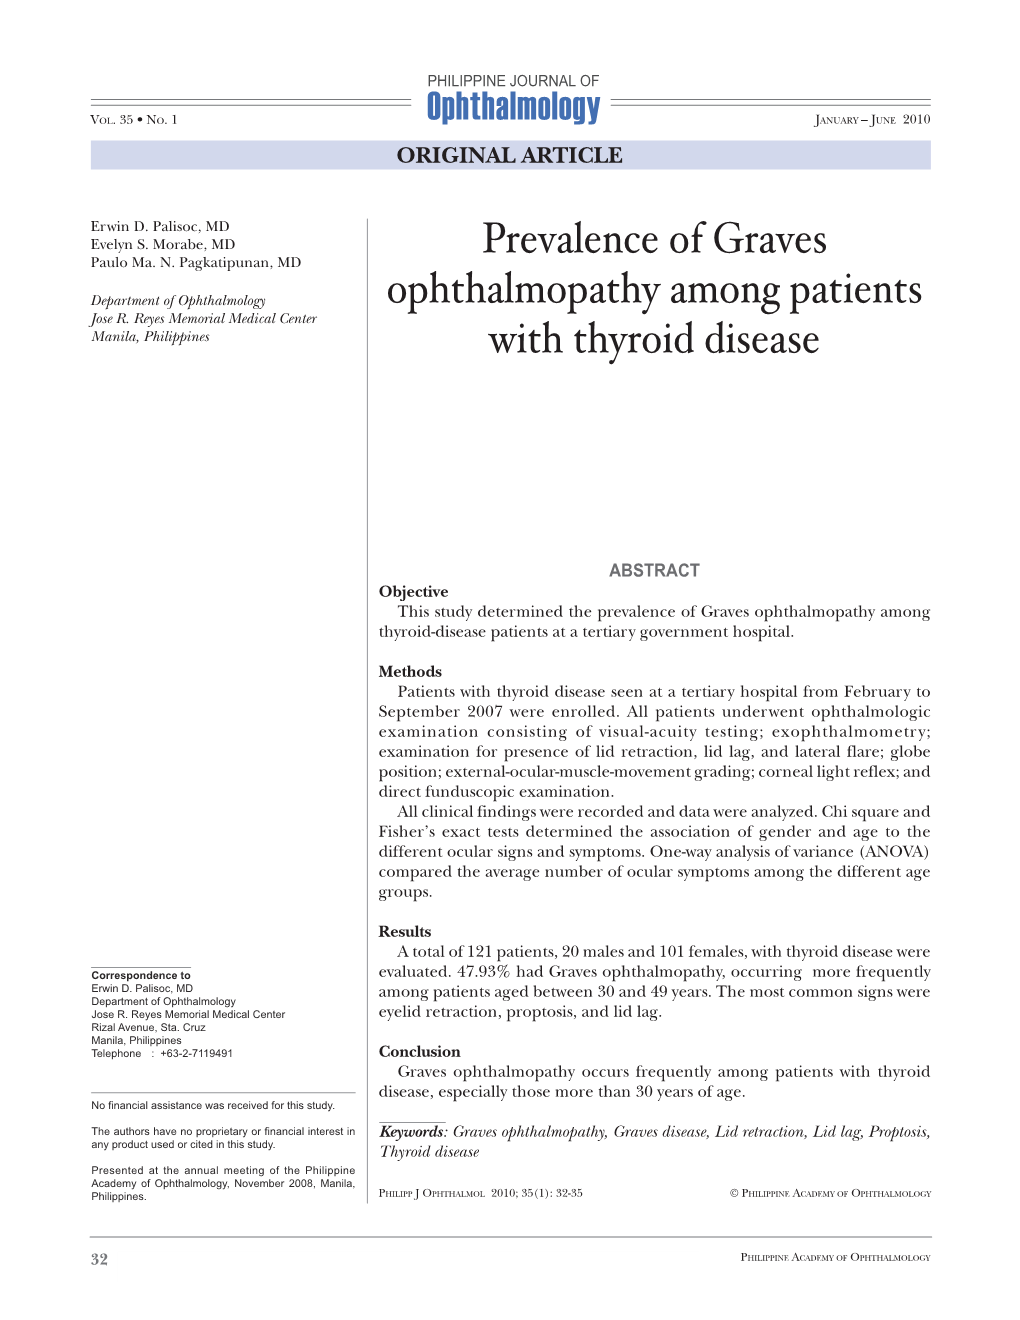 Graves Ophthalmopathy Among Thyroid-Disease Patients at a Tertiary Government Hospital